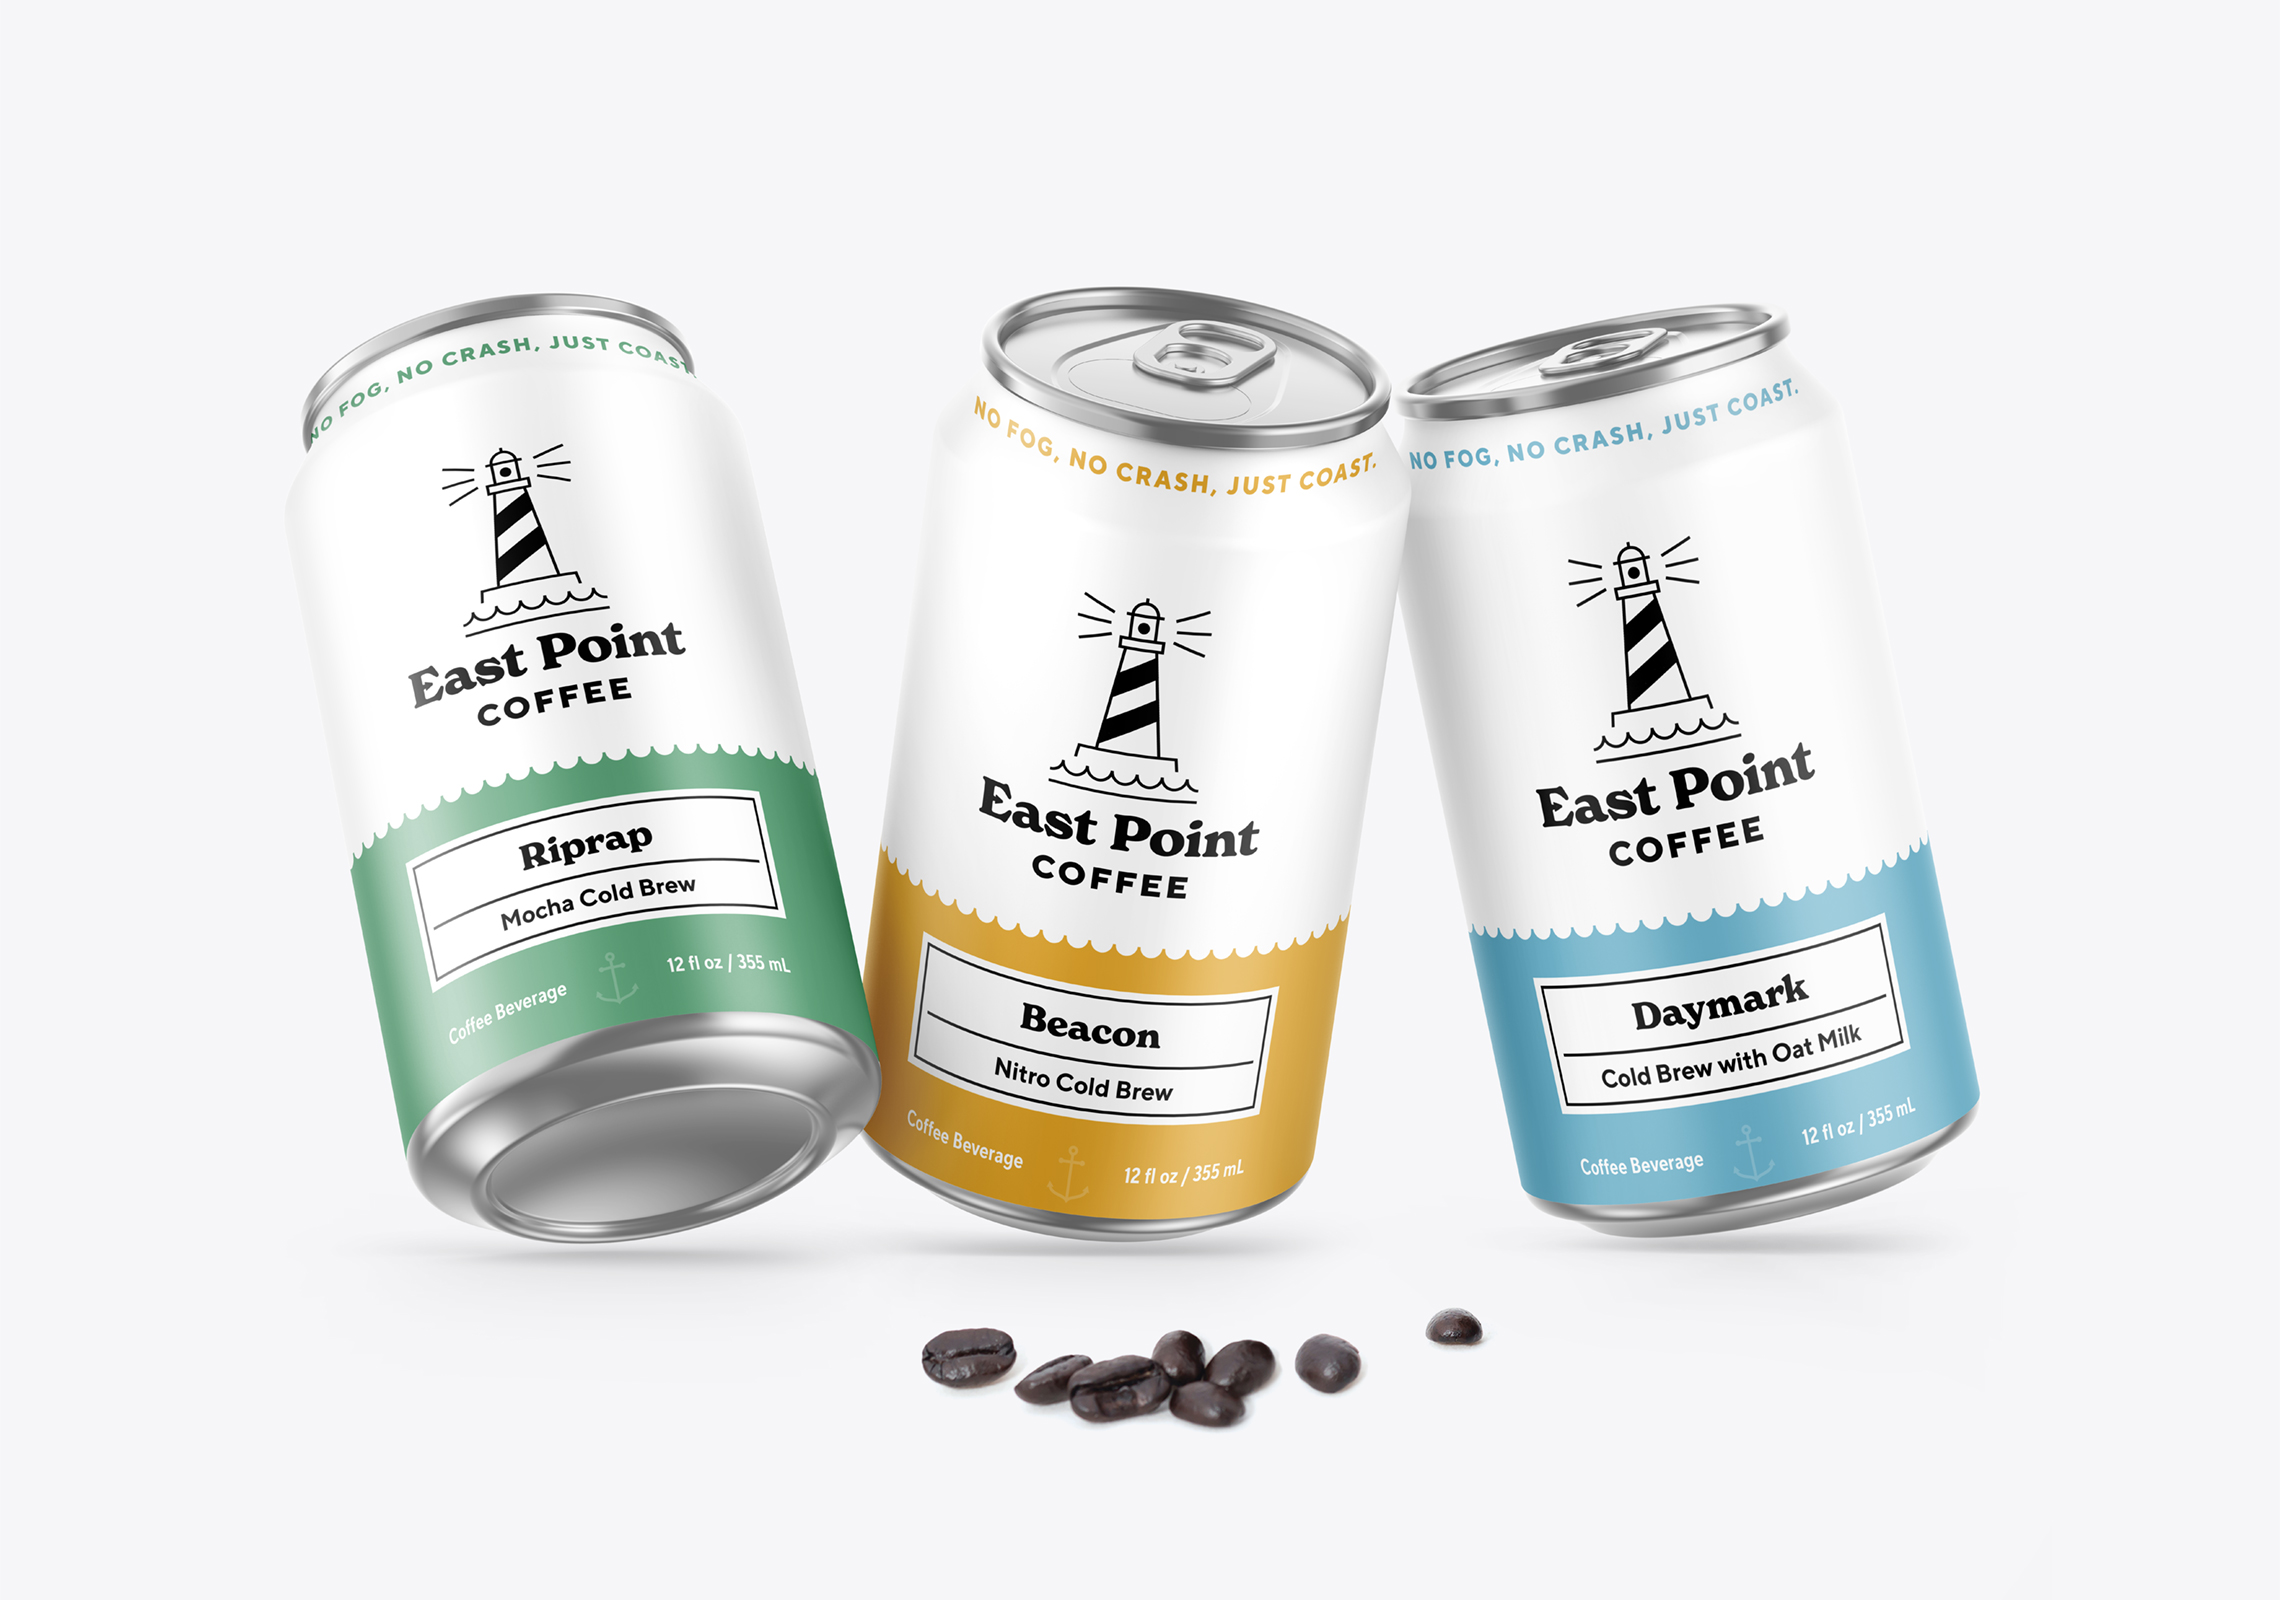 Packaging Design: East Point Coffee